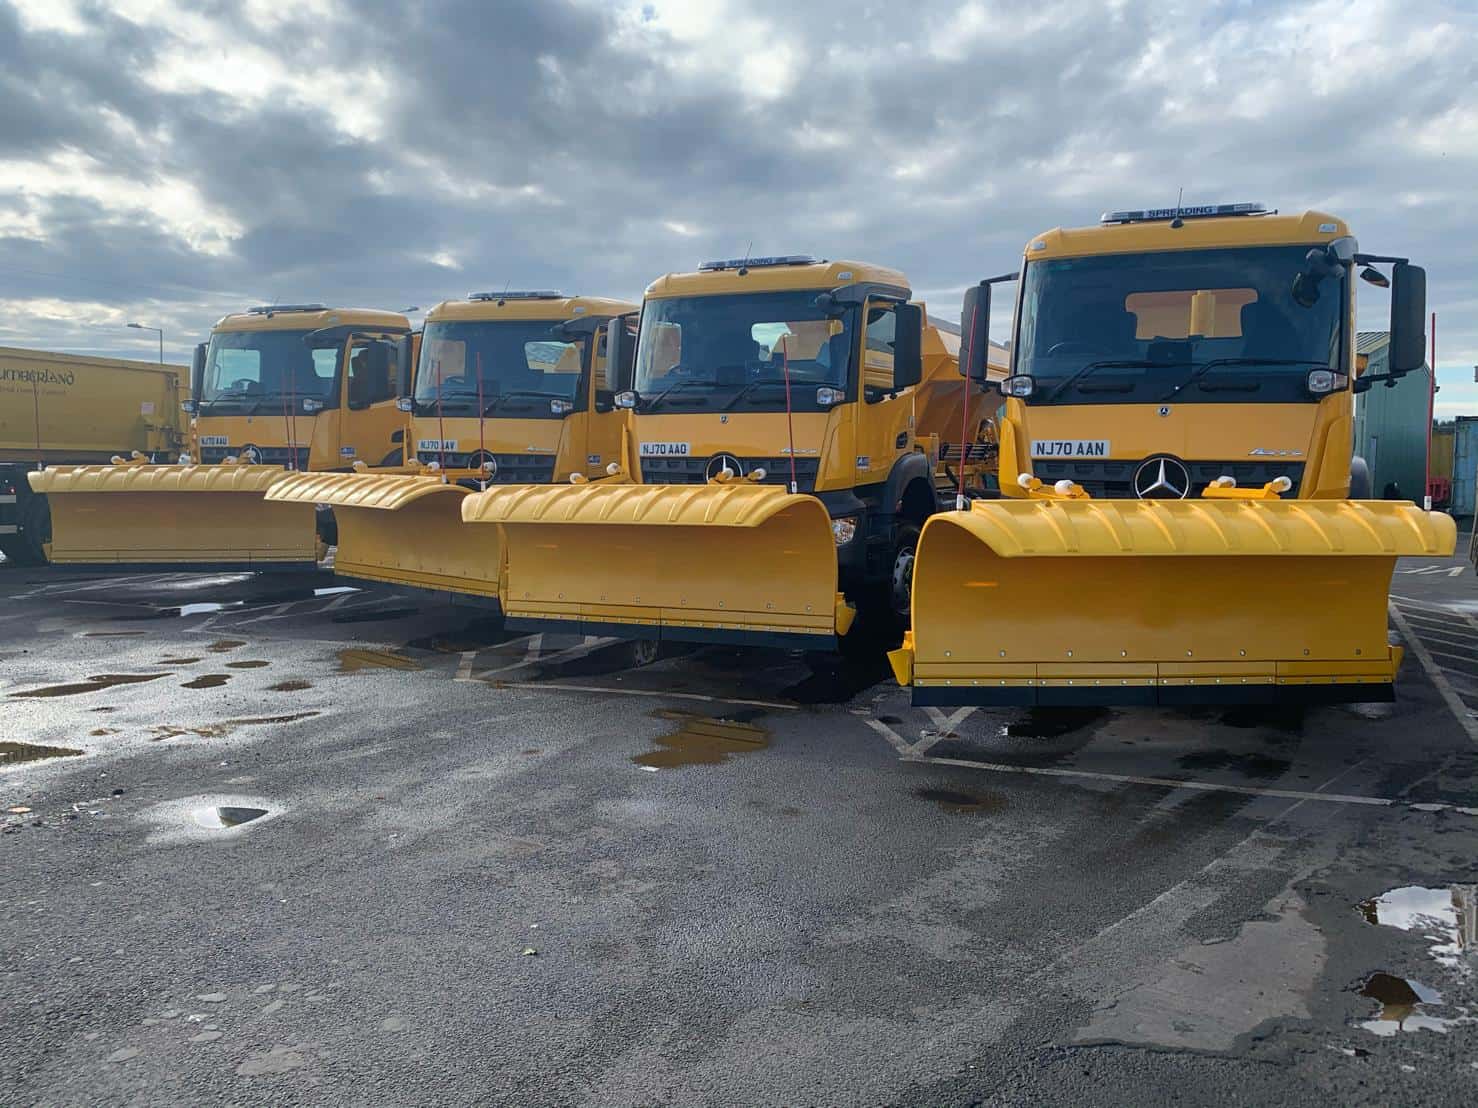 Northumberland Council takes delivery of four Arocs 182 AK Trucks through TPPL’s framework